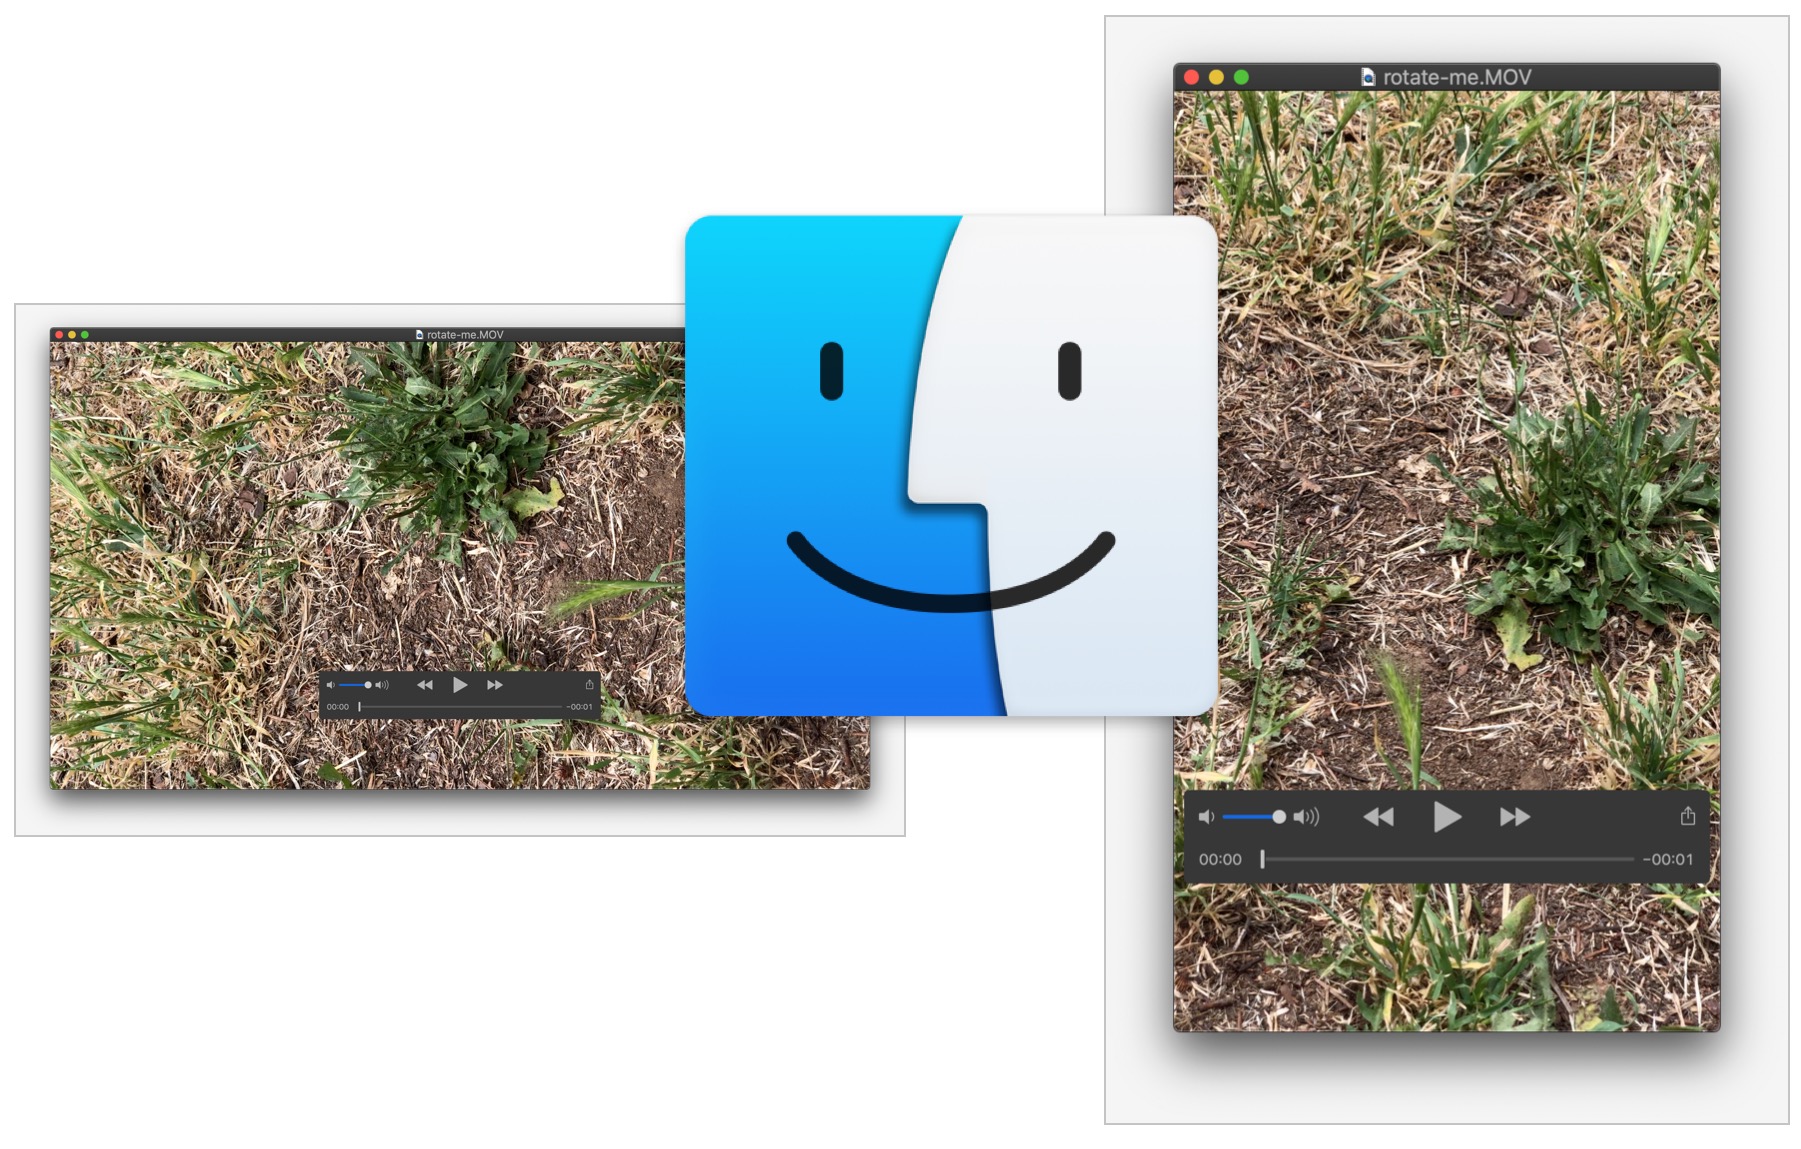 How to Rotate a Movie in Mac Finder with Quick Actions